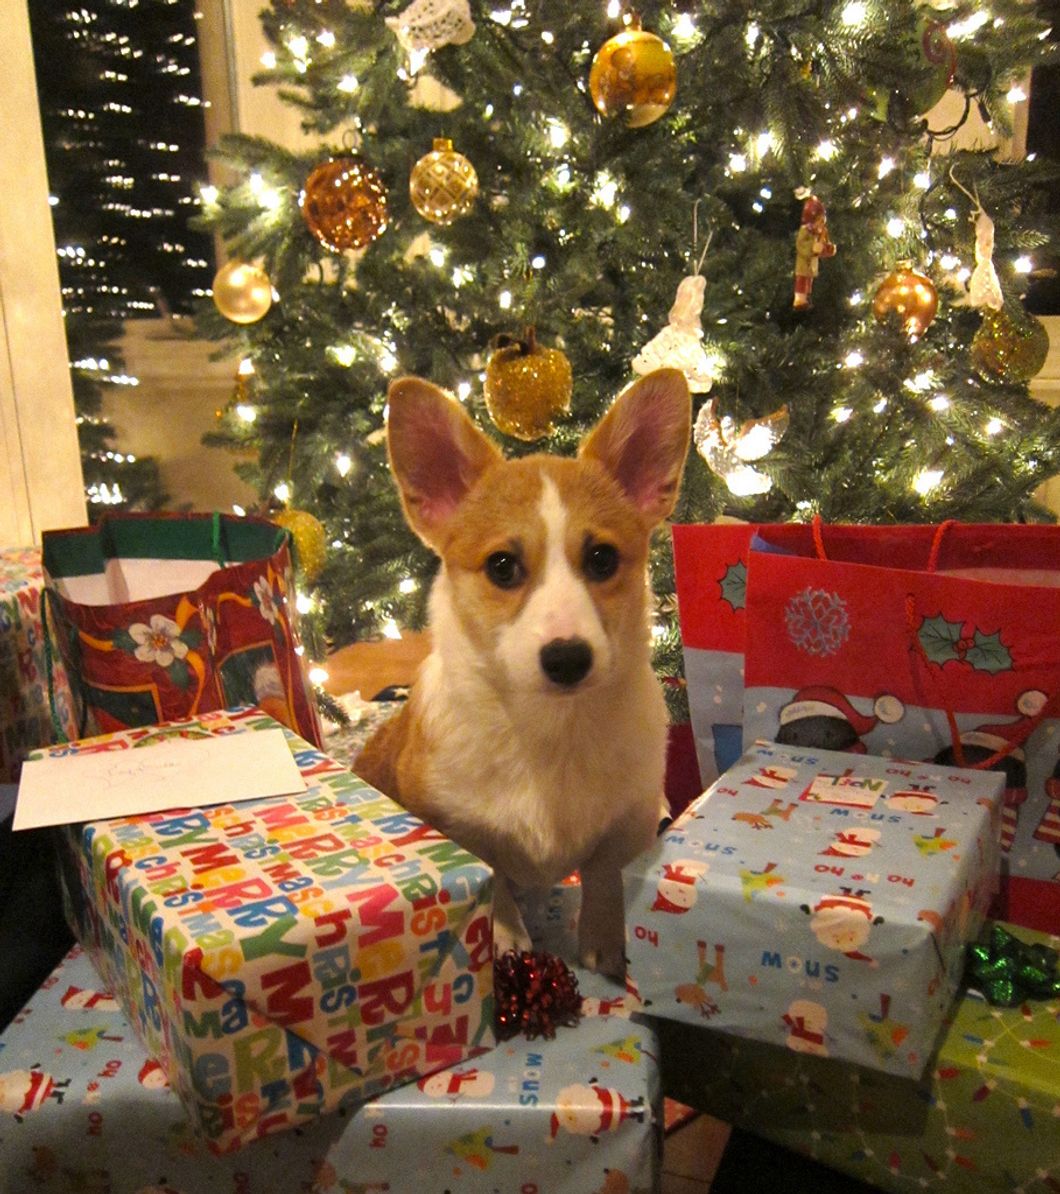 An Open Letter To Those Who Had A Tiny Furry Friend Under Their Christmas Tree